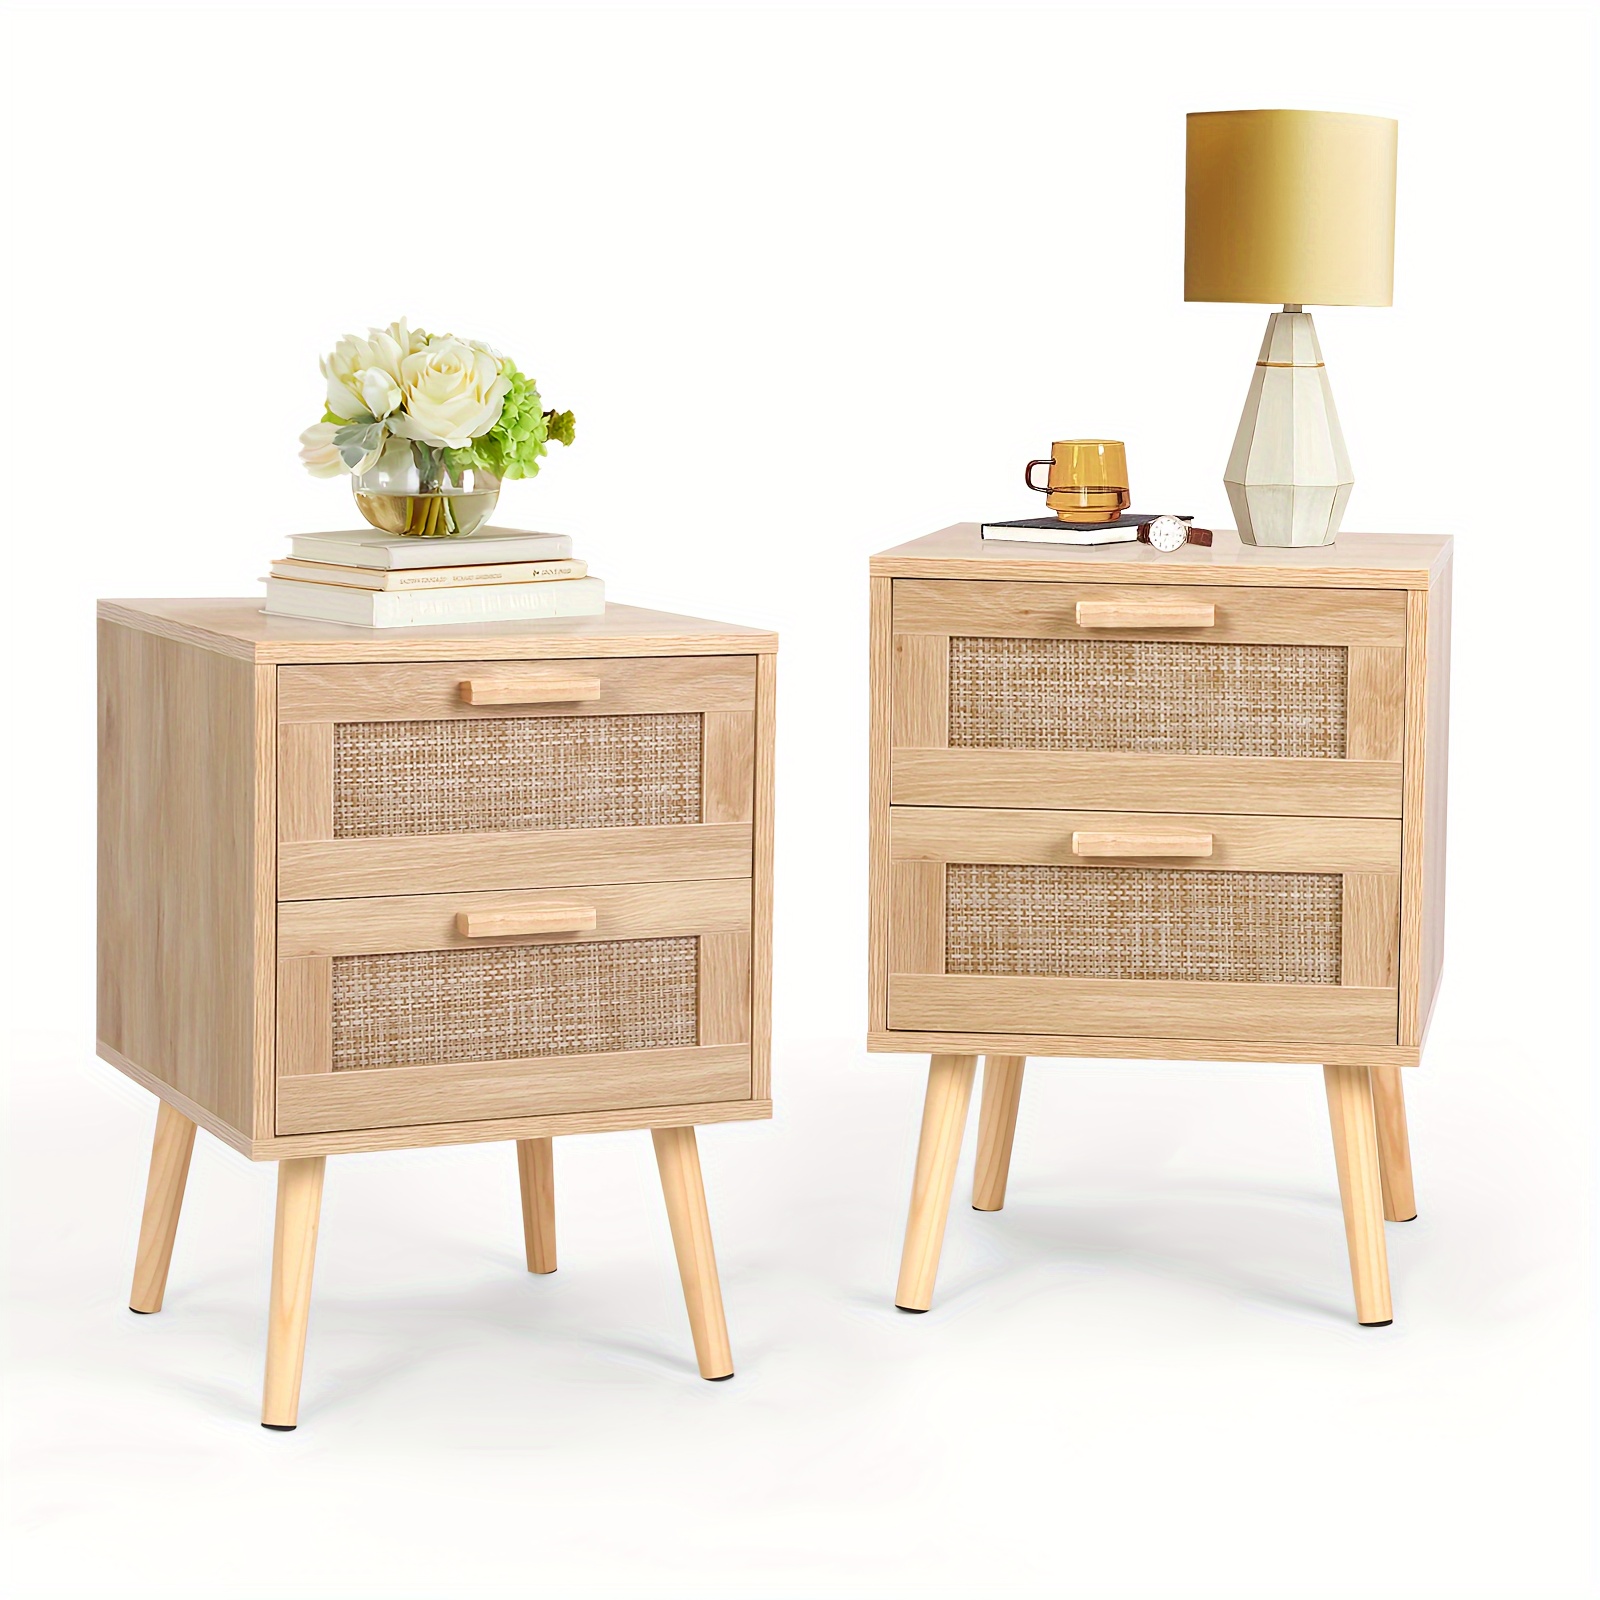 

2pcs Rattan Nightstand Set, Wooden End Table With 2 Drawers, Solid Wood Legs, Bedroom Side Table With Handmade Rattan Accents, Smooth Slide, Easy Assembly For Home Decor